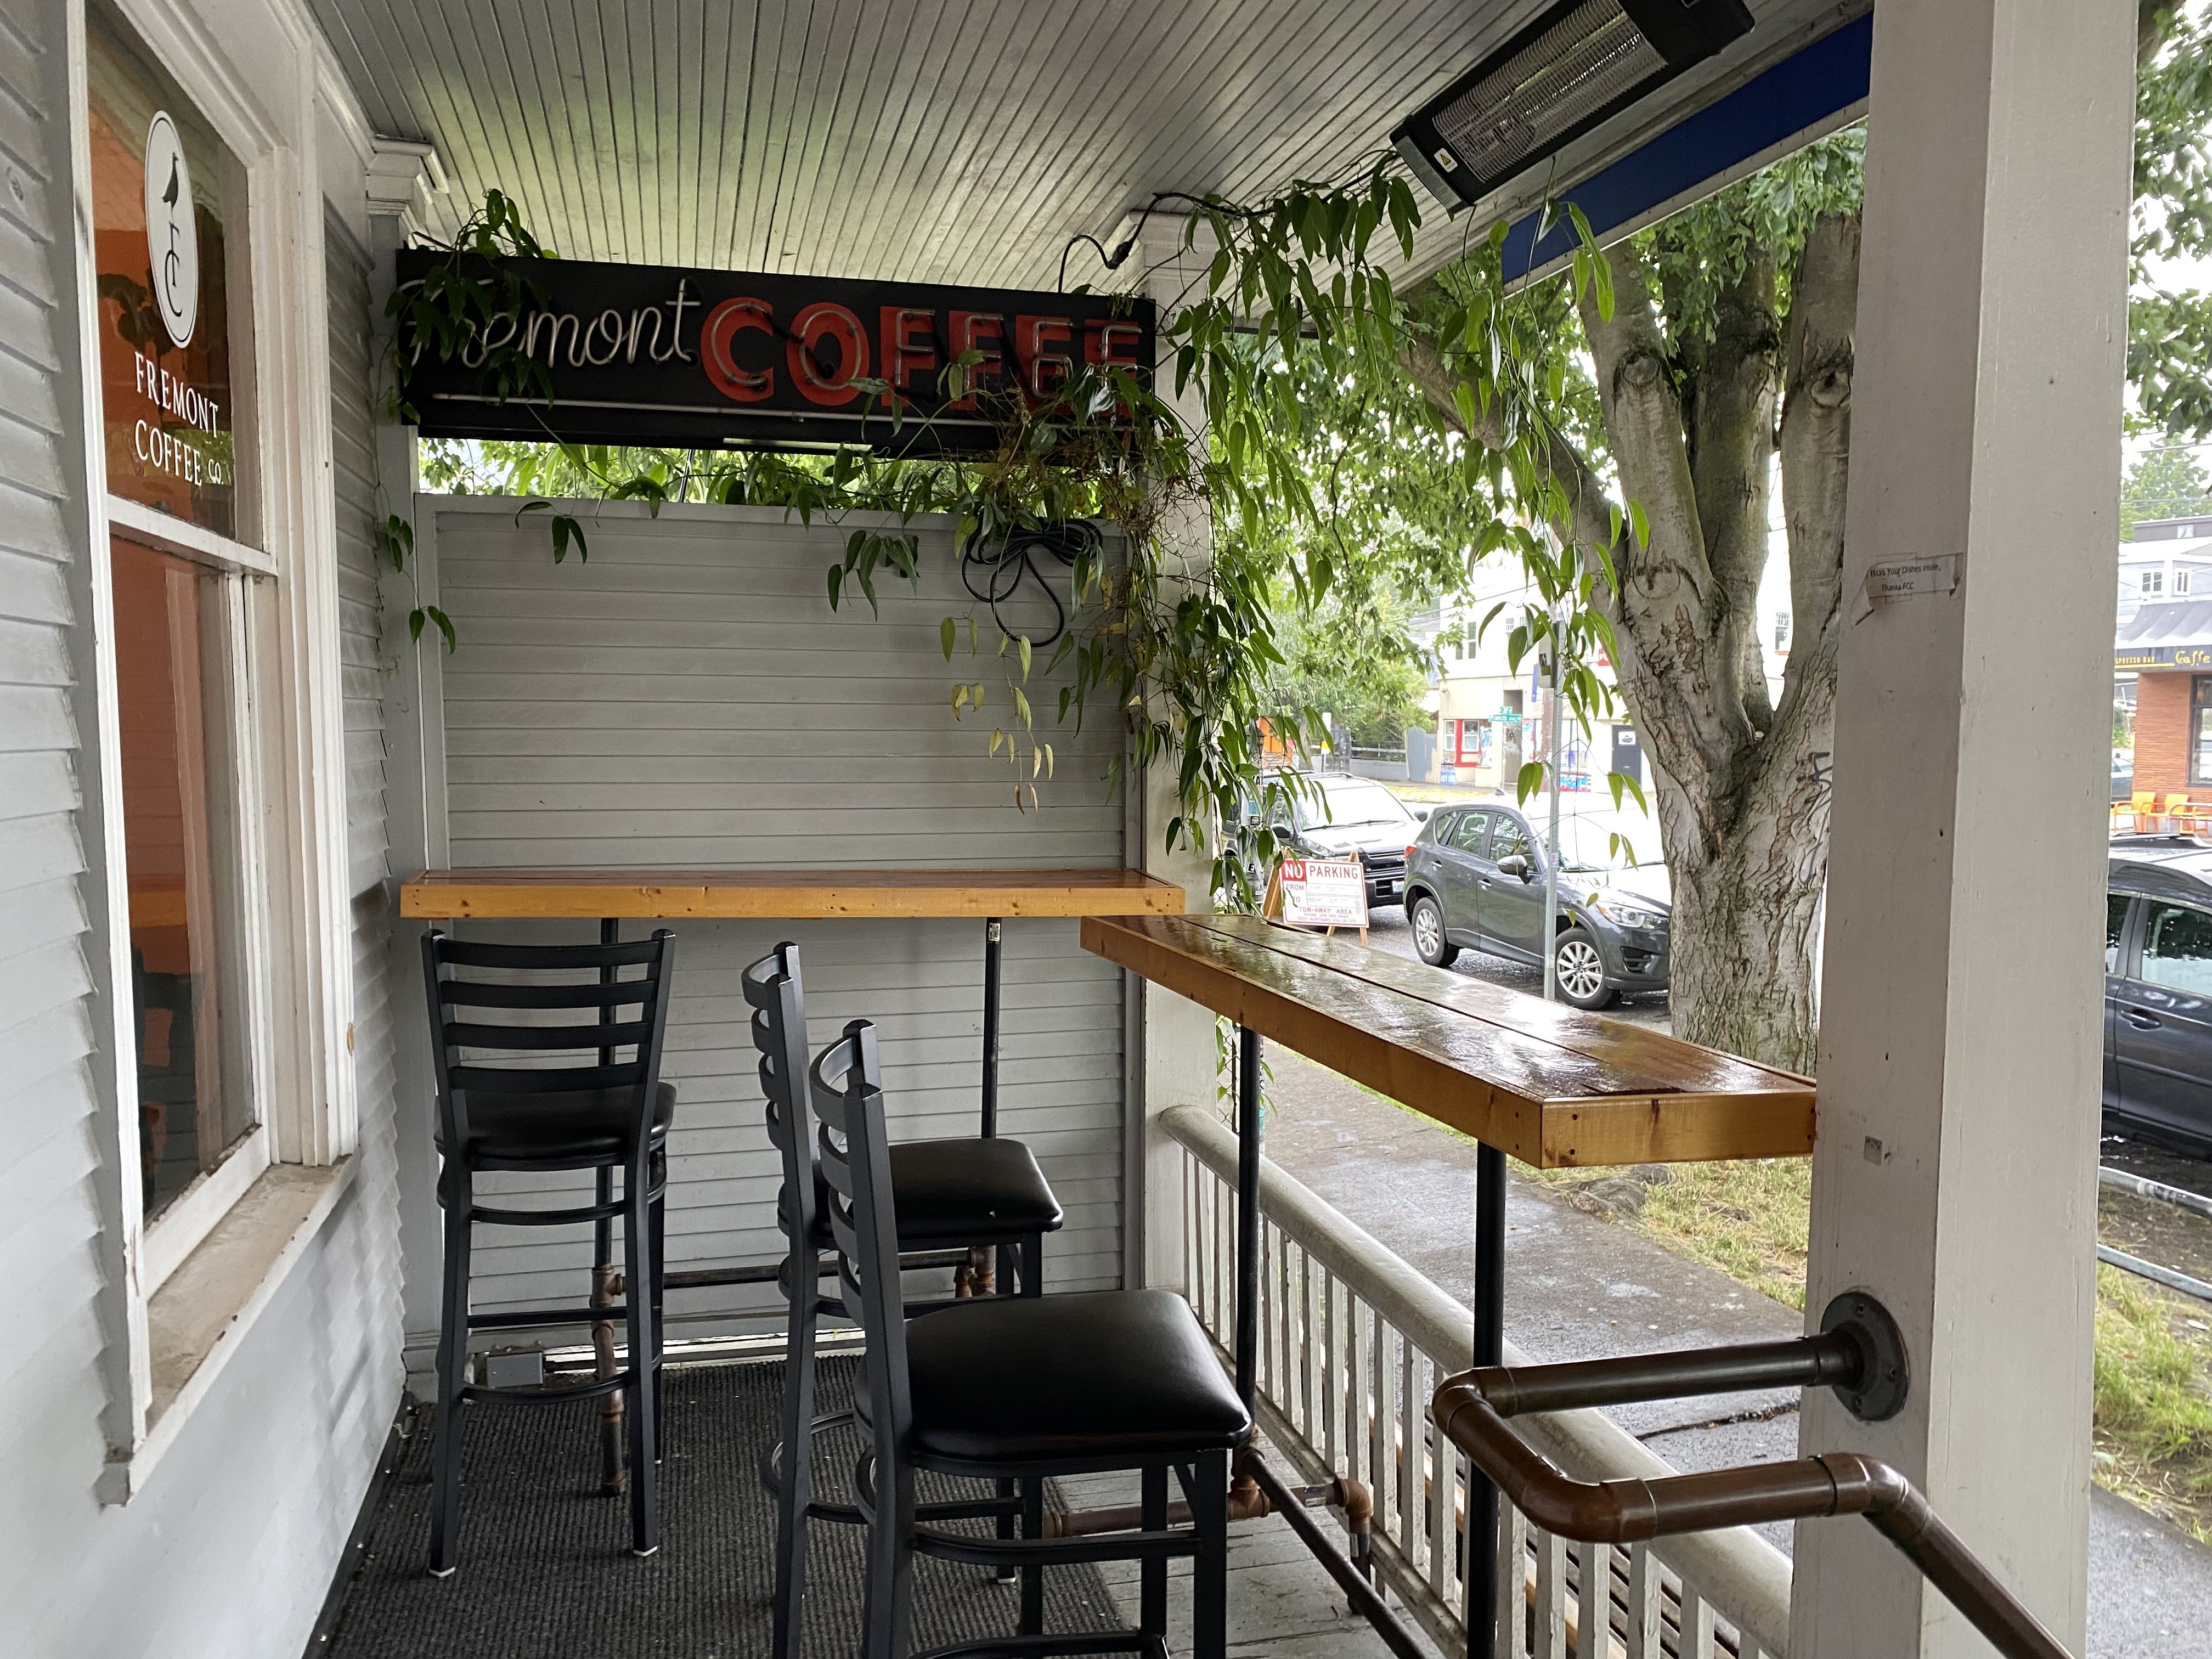 Barstool seating at a wooden counter facing a sidewalk, with a sign that says "Fremont Coffee Co" above.